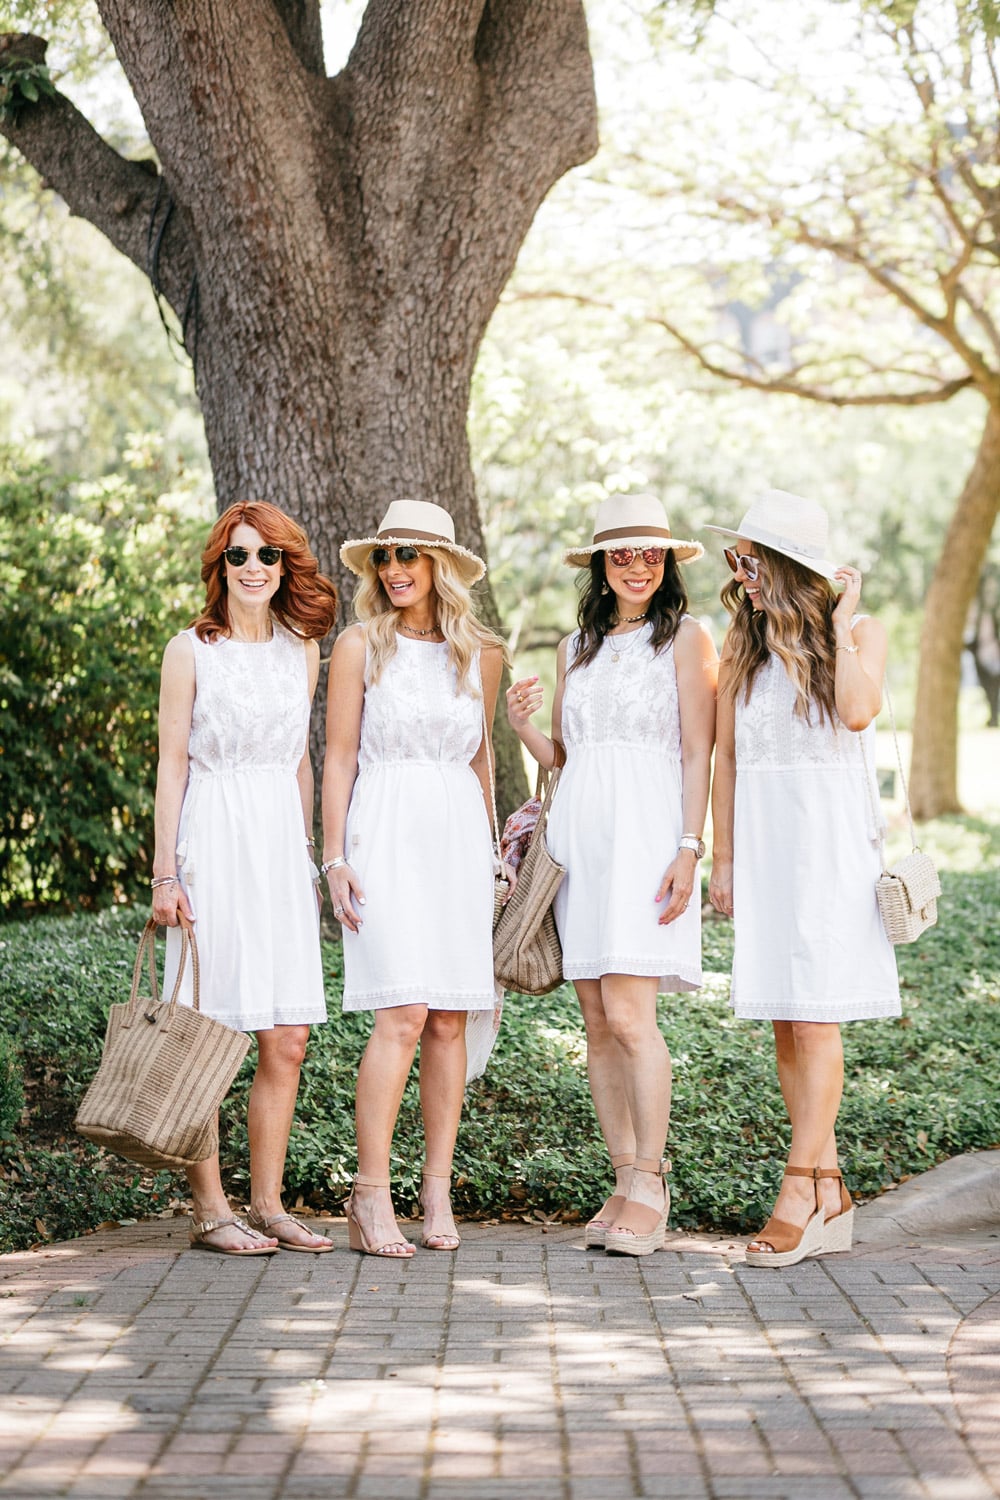 chic at ever age in j jill white embroidered side tie dress